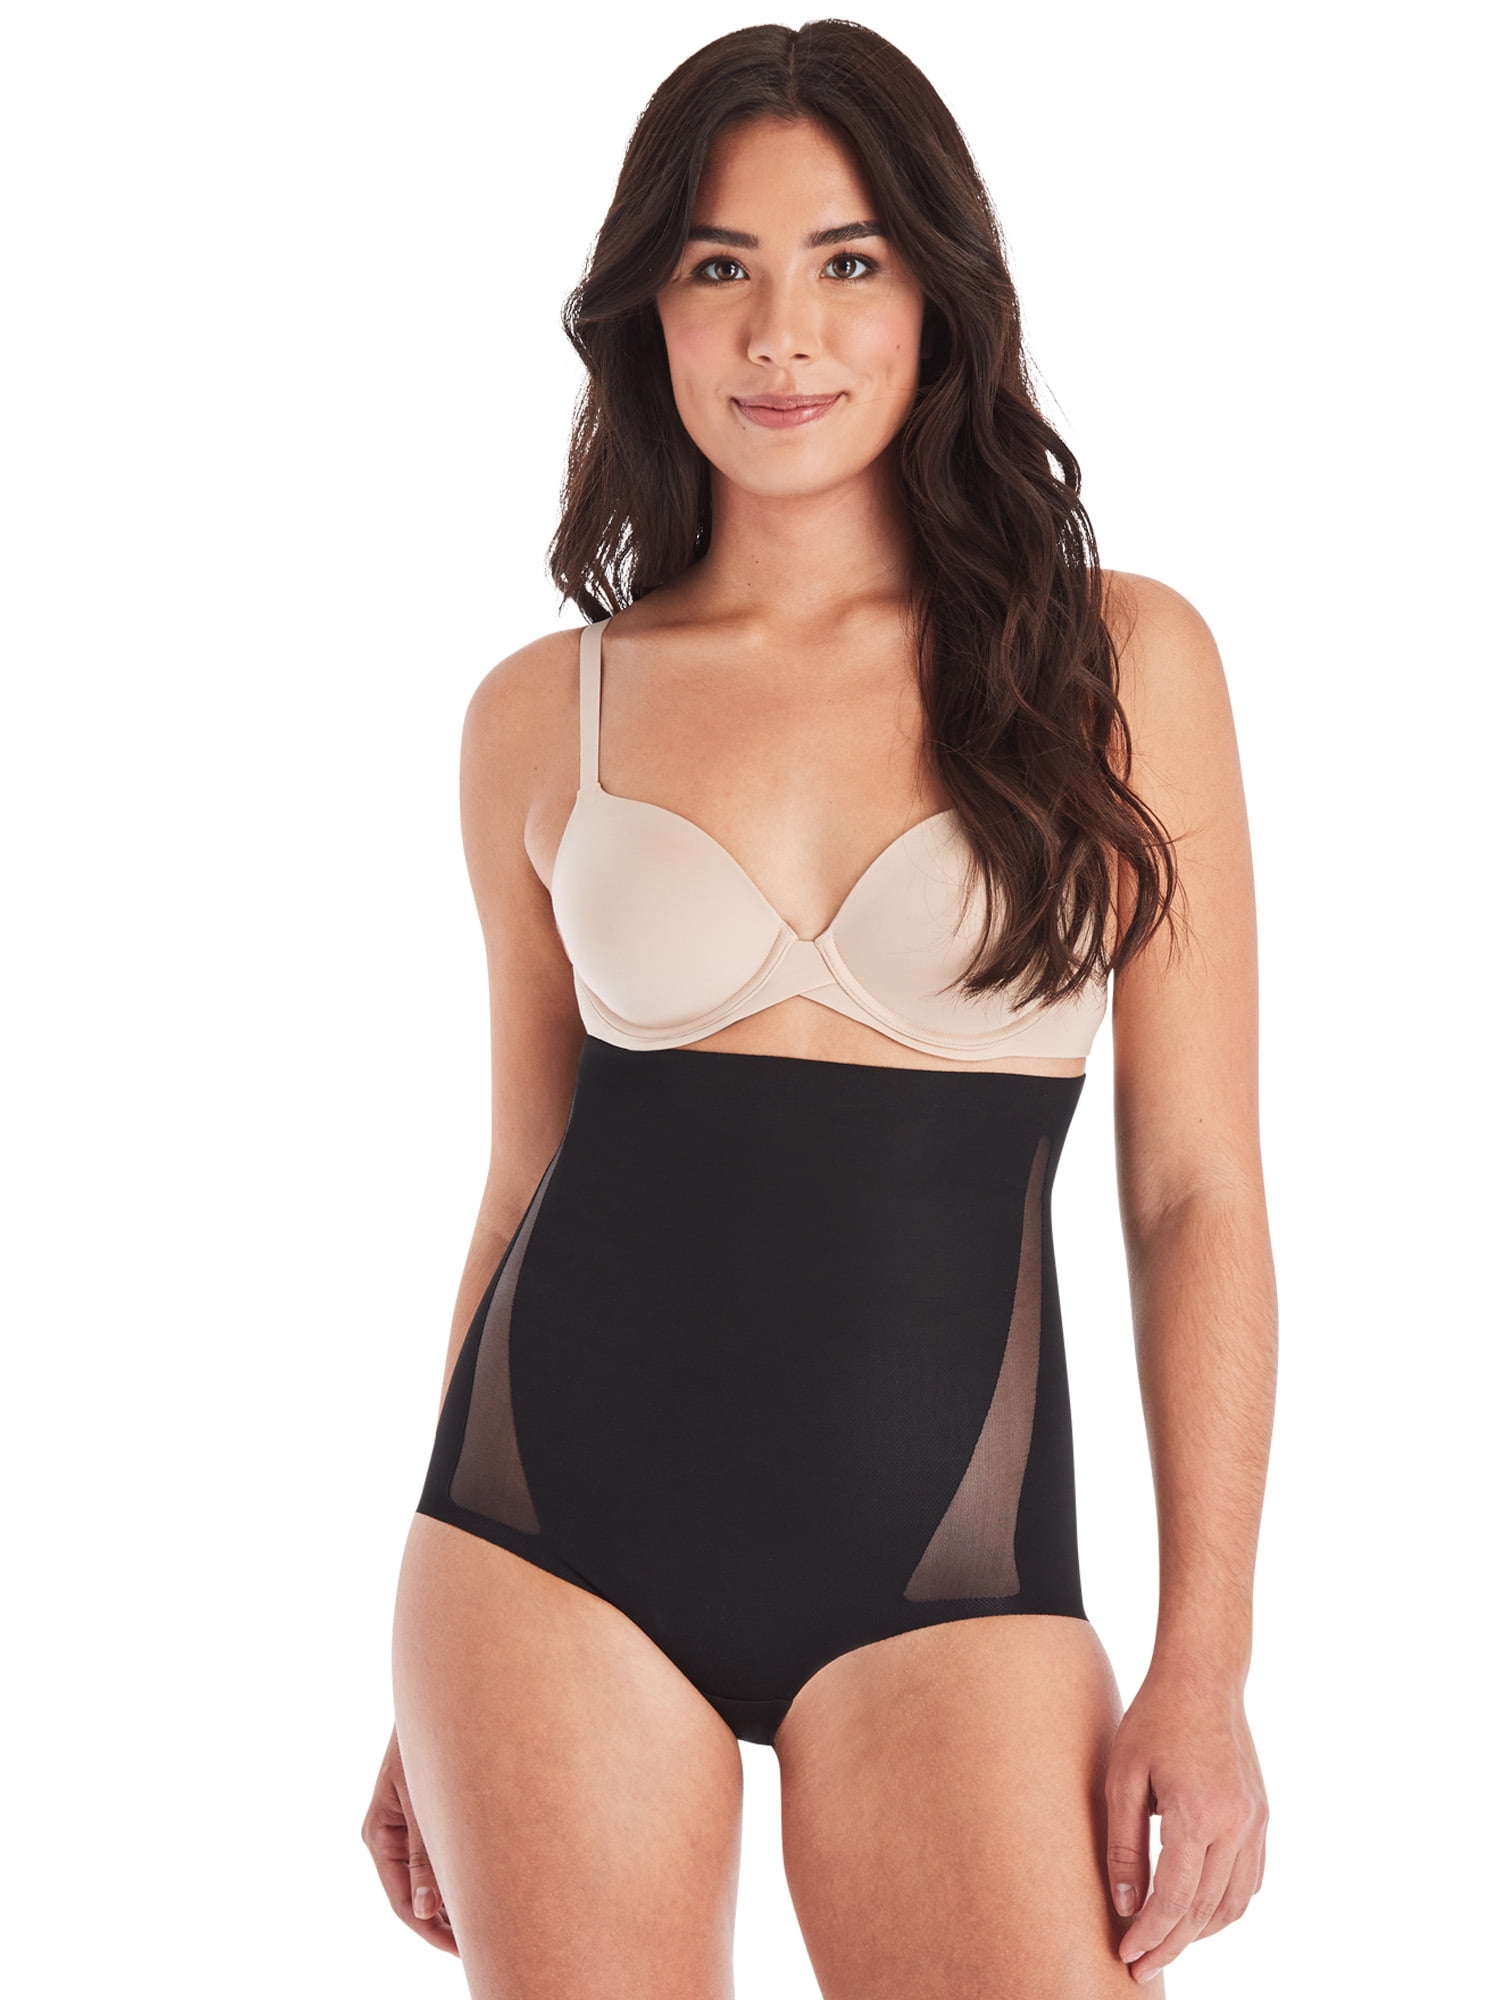 Maidenform Women's Flexees Firm Control Booty Lift Shorty Shapewear, Style  FLS093, Sizes up-to 3XL 